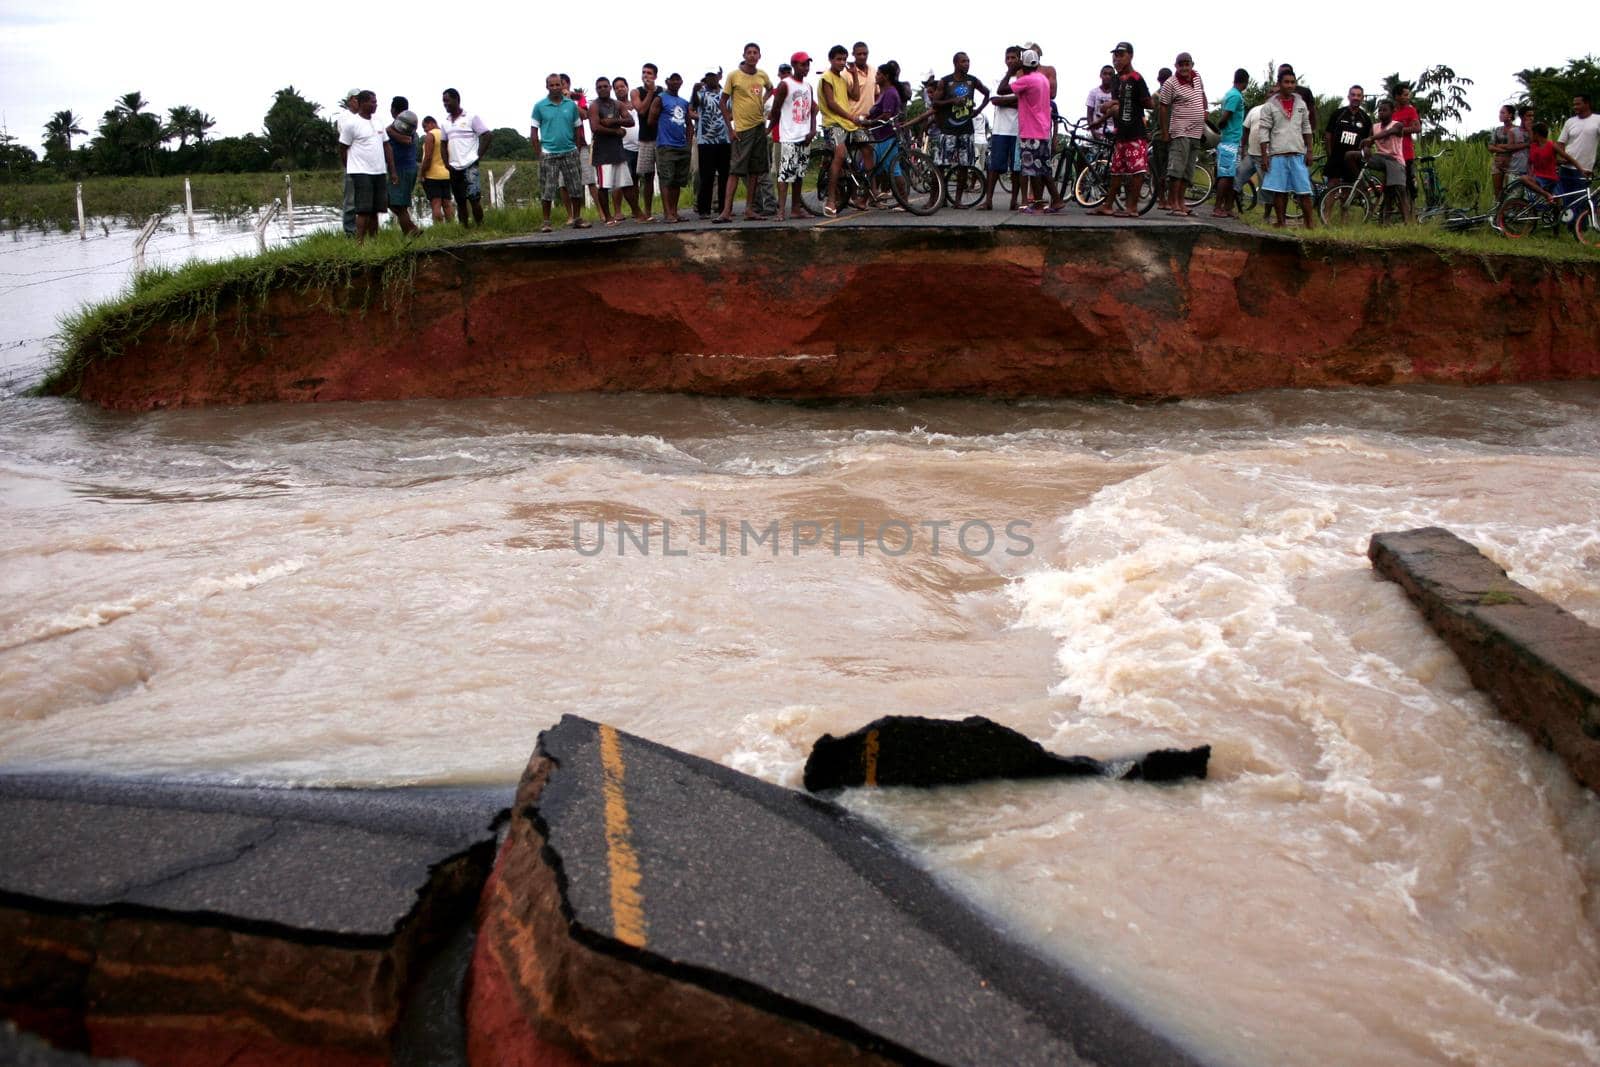 prado, bahia, brazil - april 7, 2010: people trying to cross a road destroyed due to flooding of a river in the city of Prado